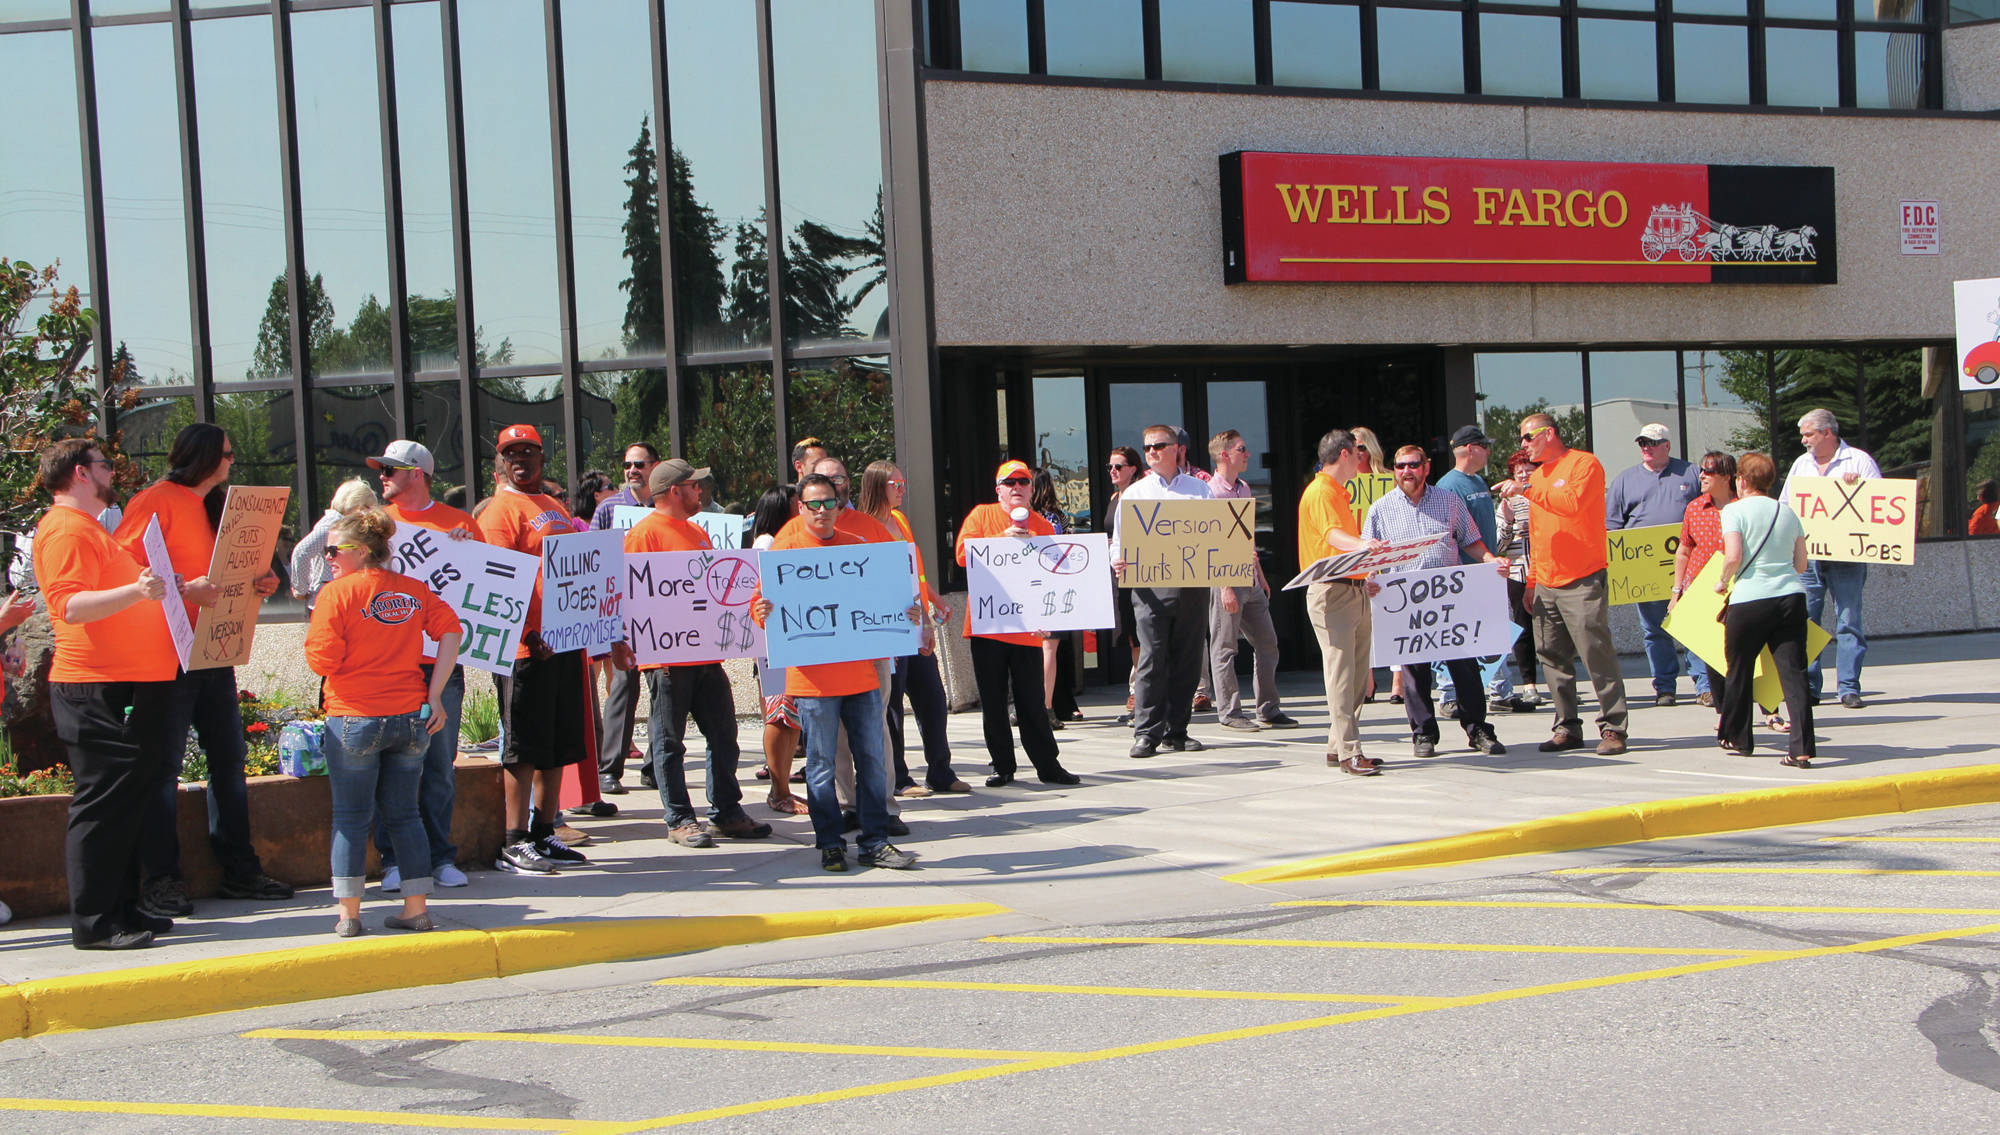 Members of Laborers Local 341 in orange shirts and others supporting the Alaska oil industry rallied against House Majority proposals to raise taxes before a hearing at the Legislative Information Office in Anchorage on July 12, 2017. (Photo/Elwood Brehmer/AJOC)